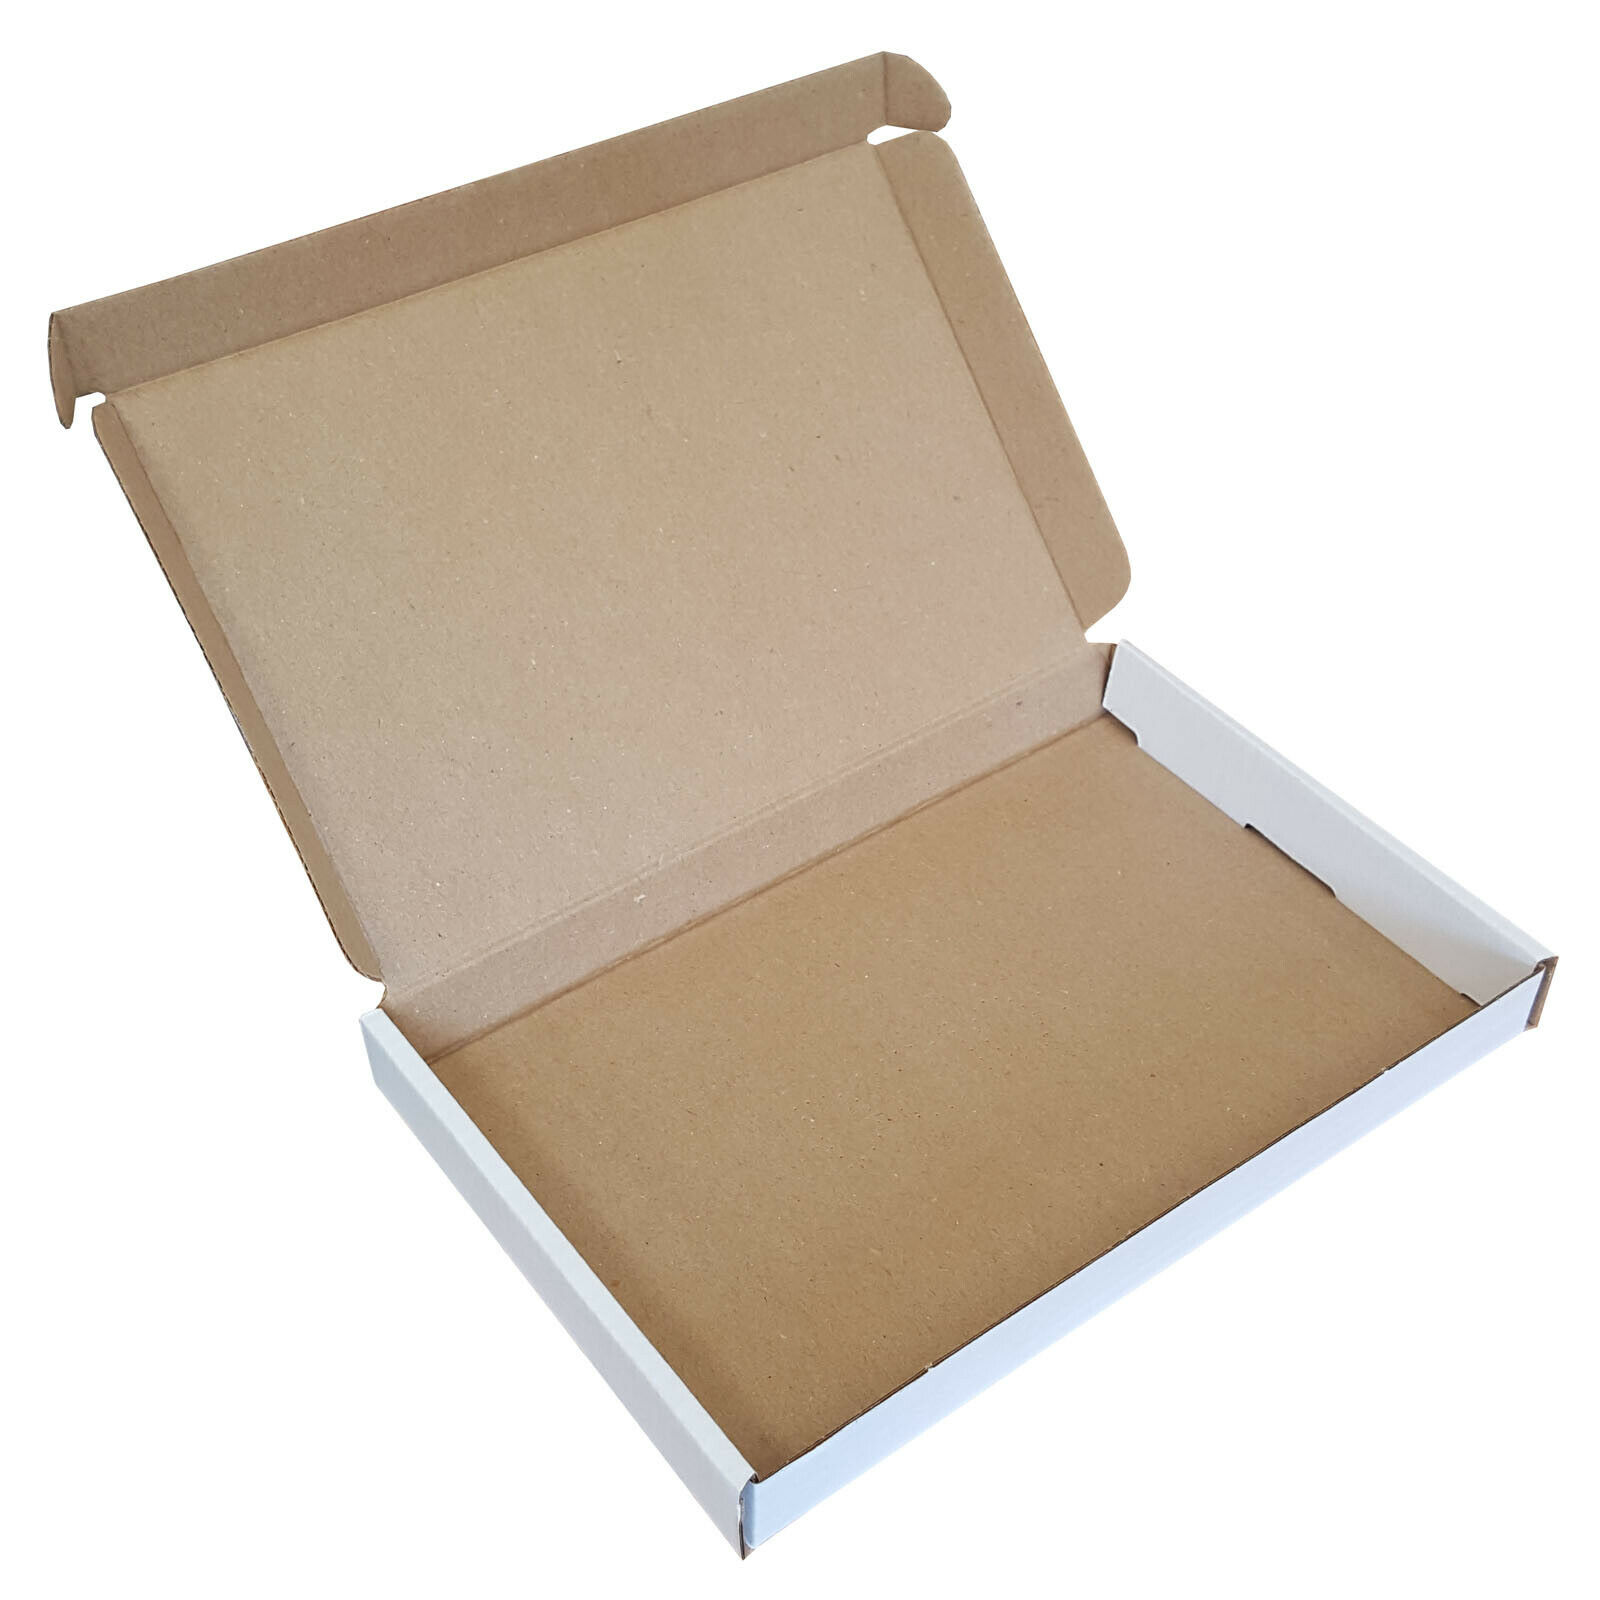 195mm x 130mm x 20mm White Large Letter PIP Cardboard Mailing Postal Boxes